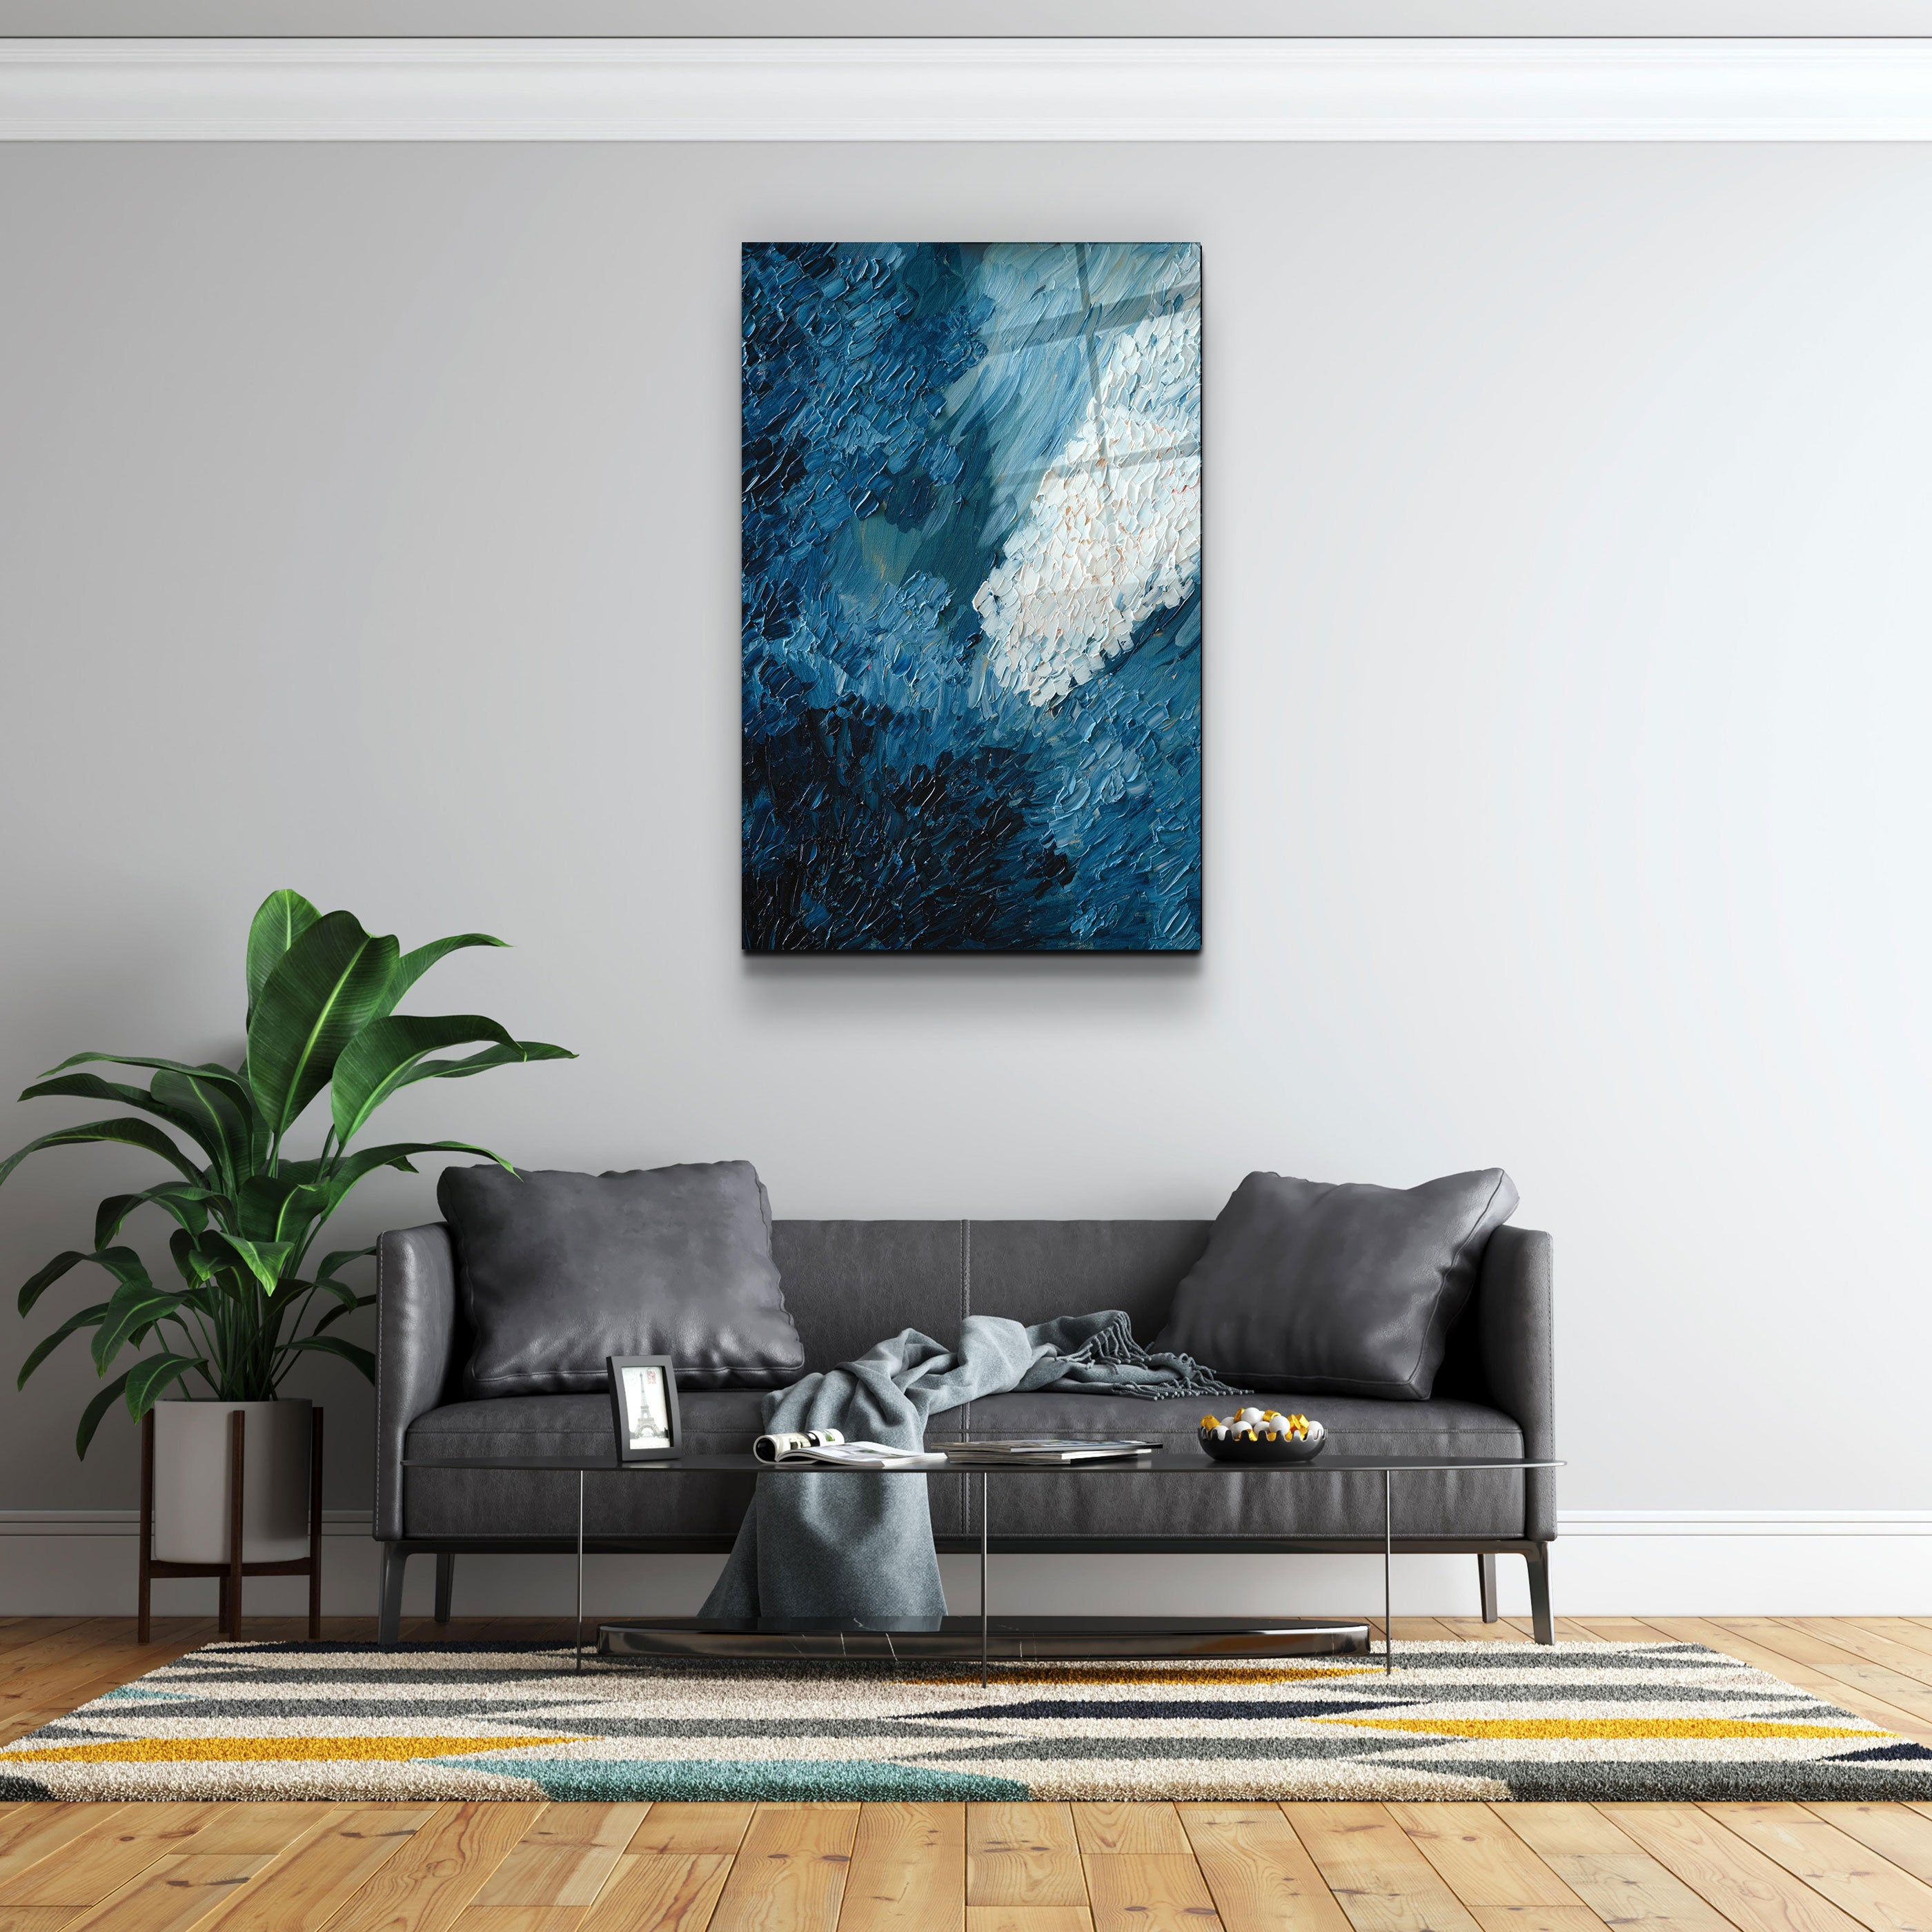 ・"Blue Oil Painting - Abstract"・Designer's Collection Glass Wall Art